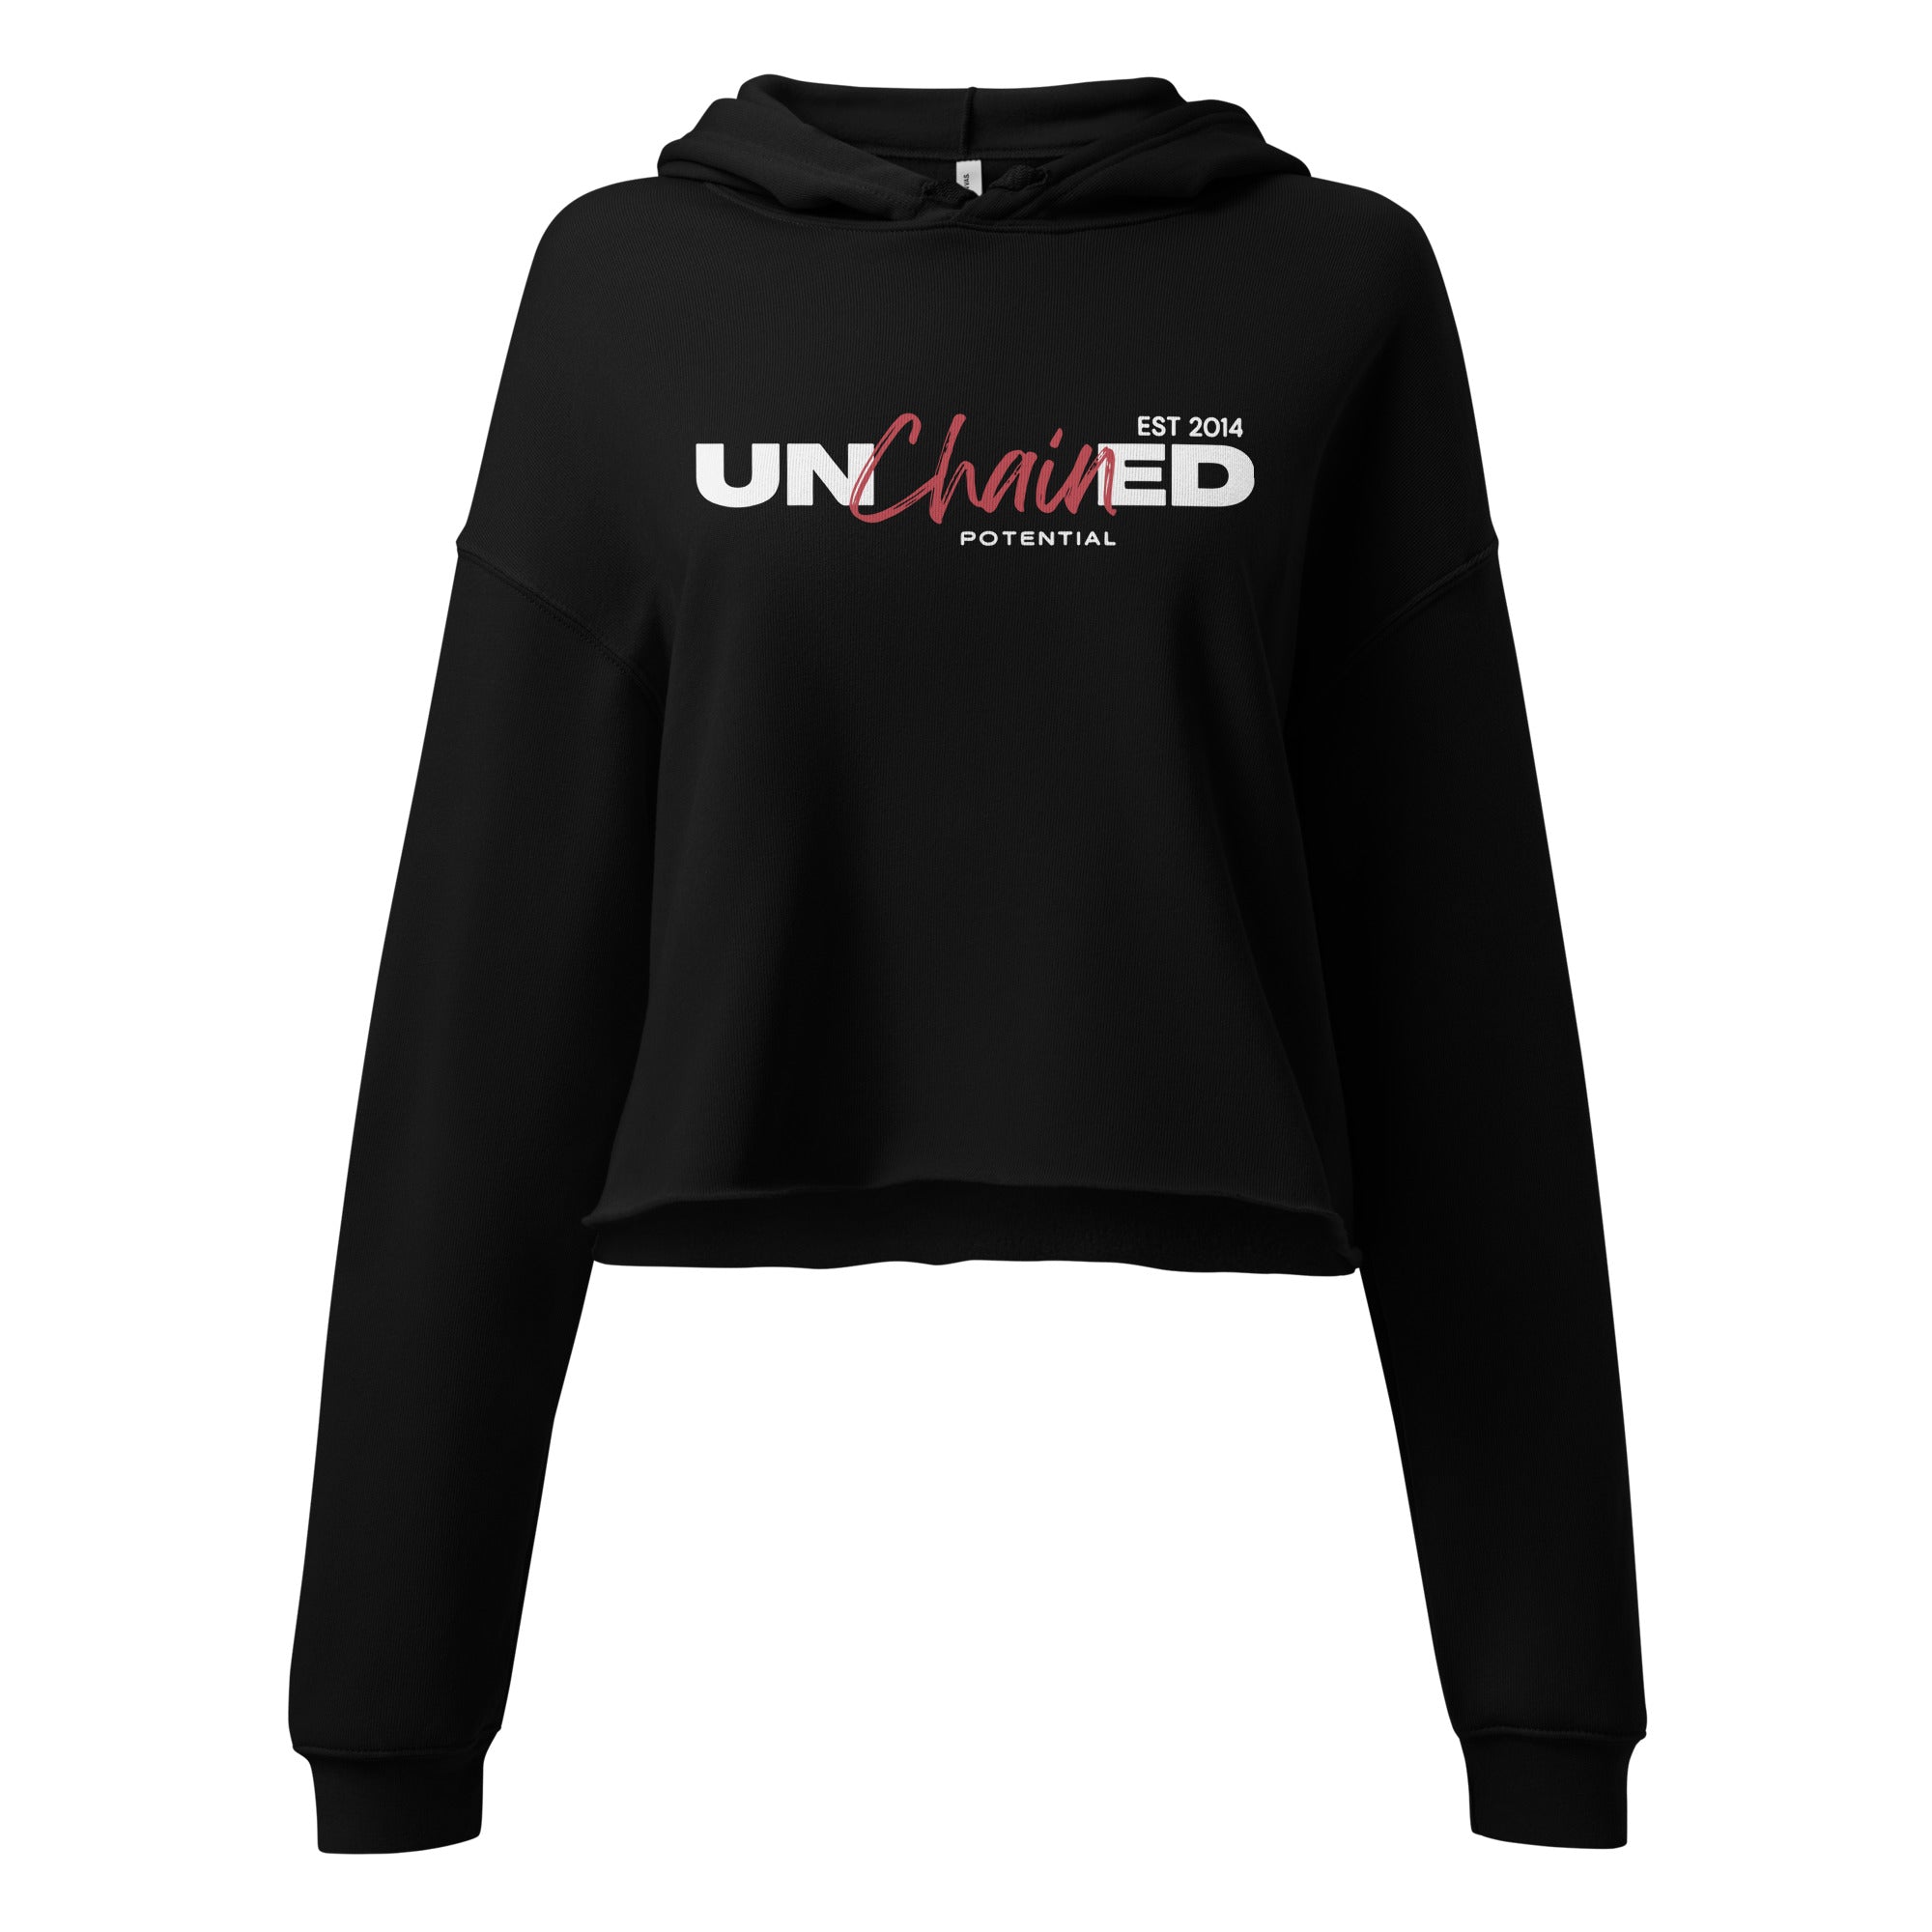 Unchained Potential Crop Hoodie v2